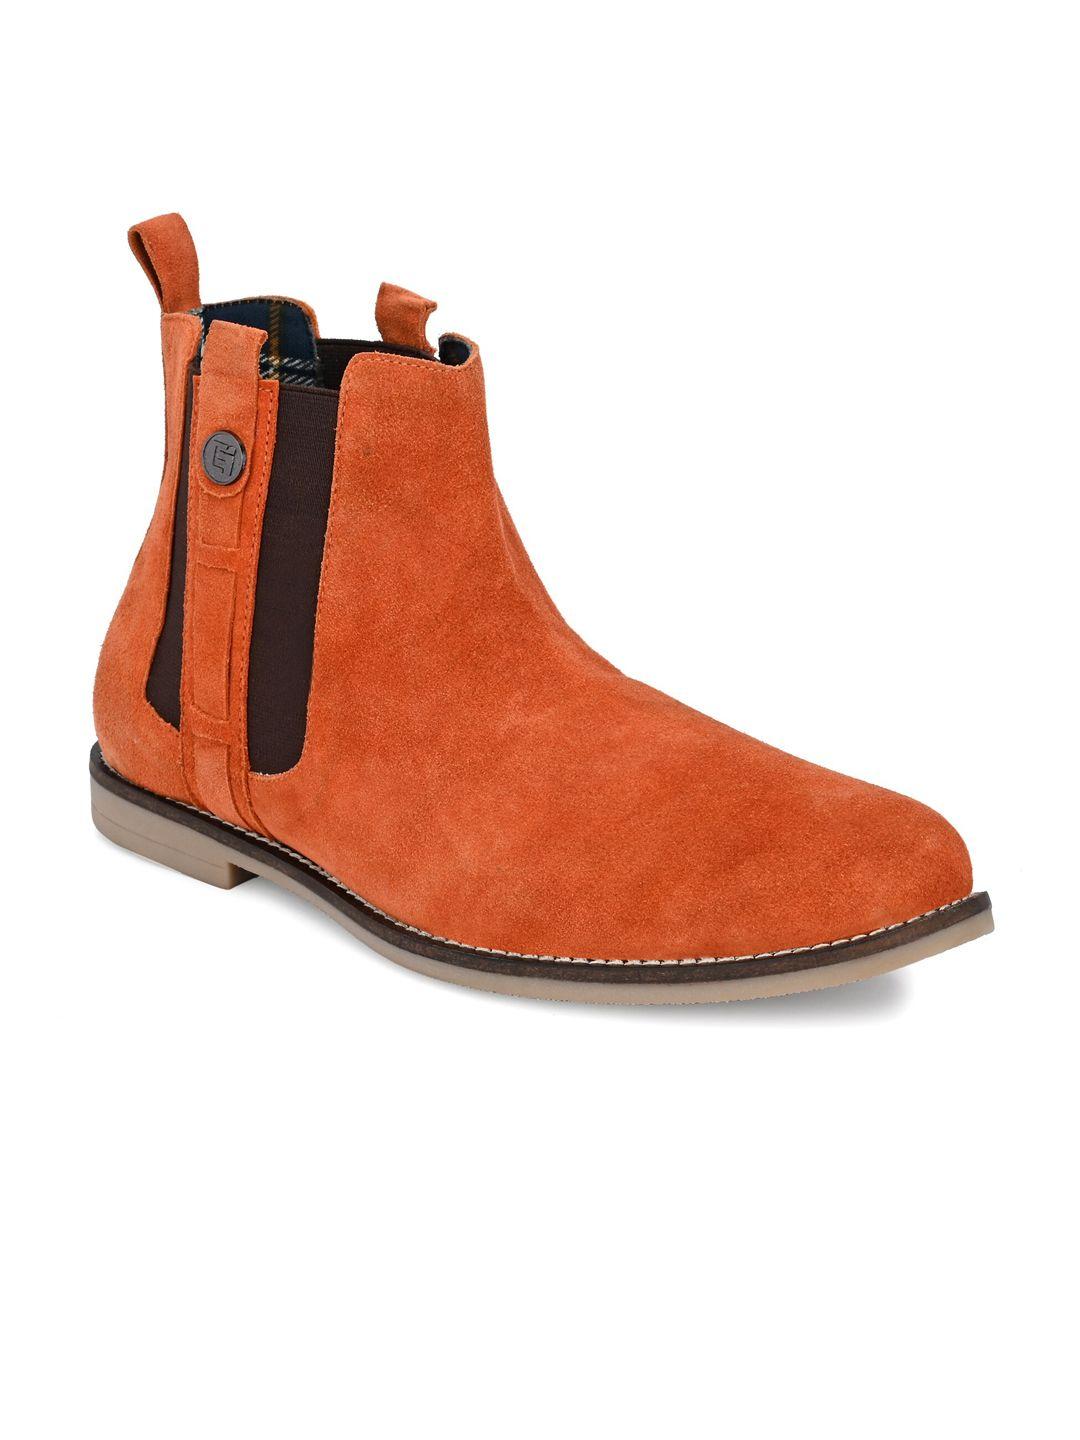 eego italy men rust solid leather high-top flat boots